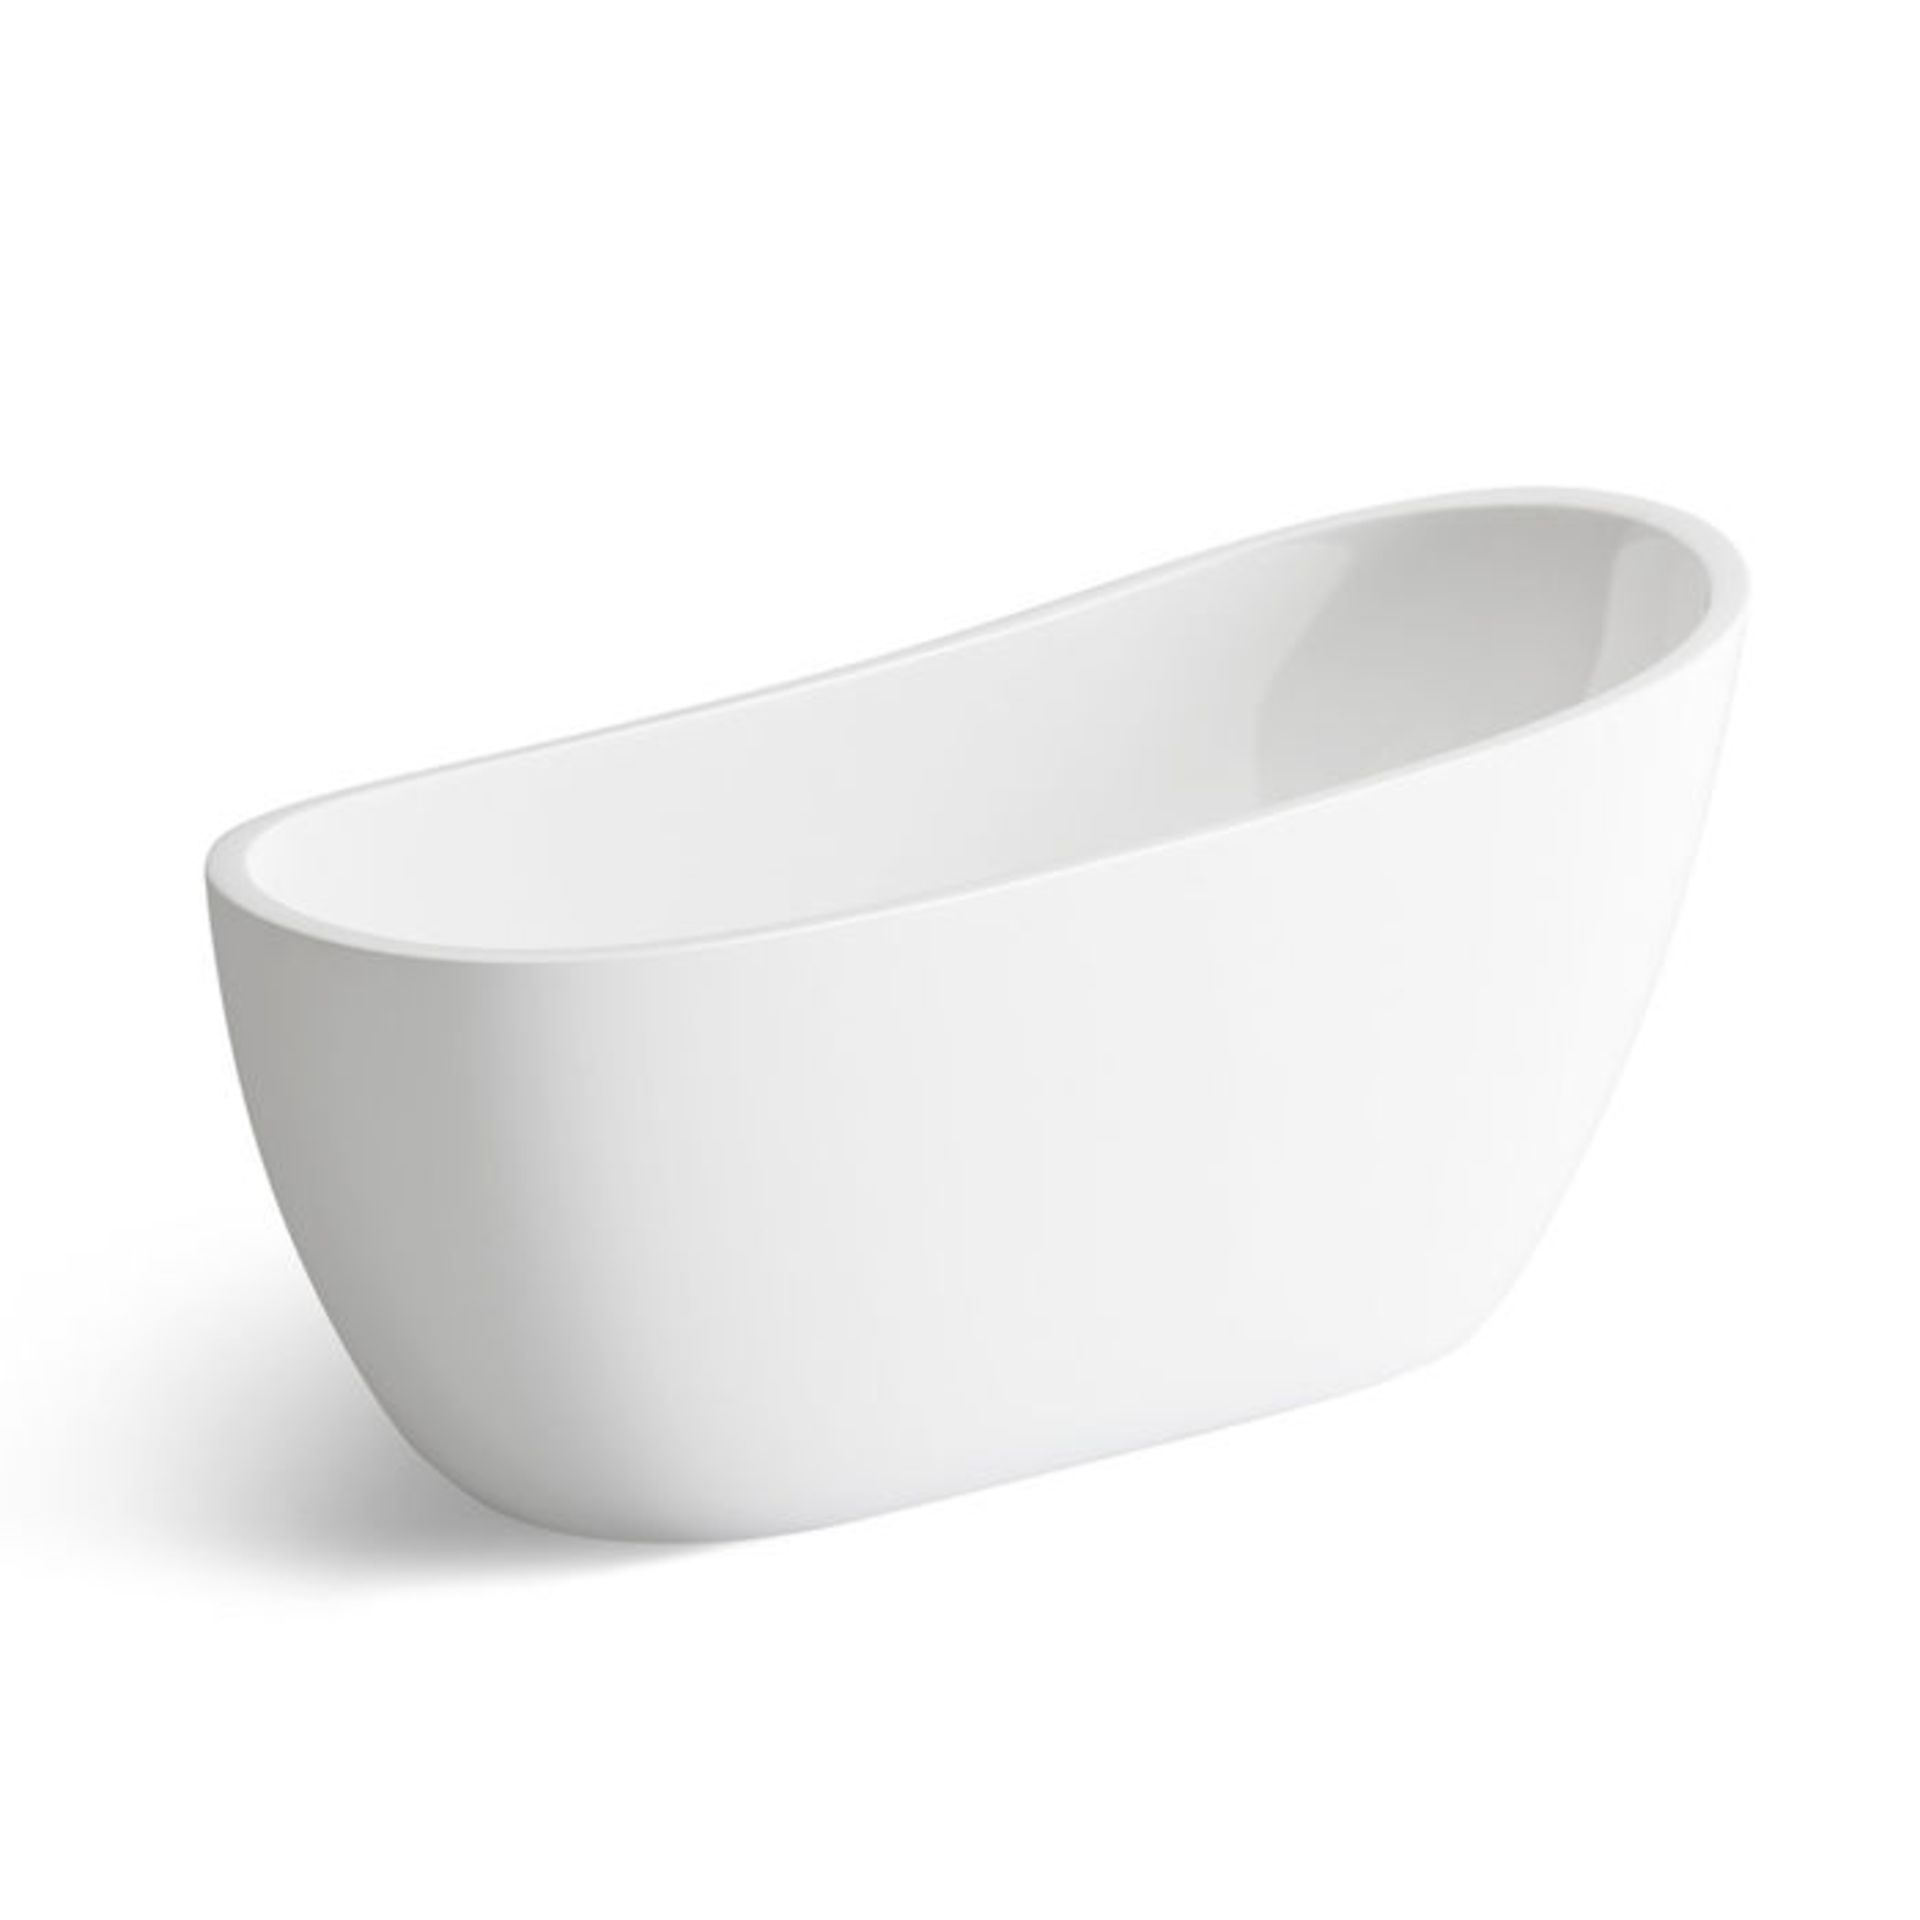 (OS57) 1520mmx720mm Willow Freestanding Bath. Showcasing contemporary clean lines for a centre piece - Image 3 of 4